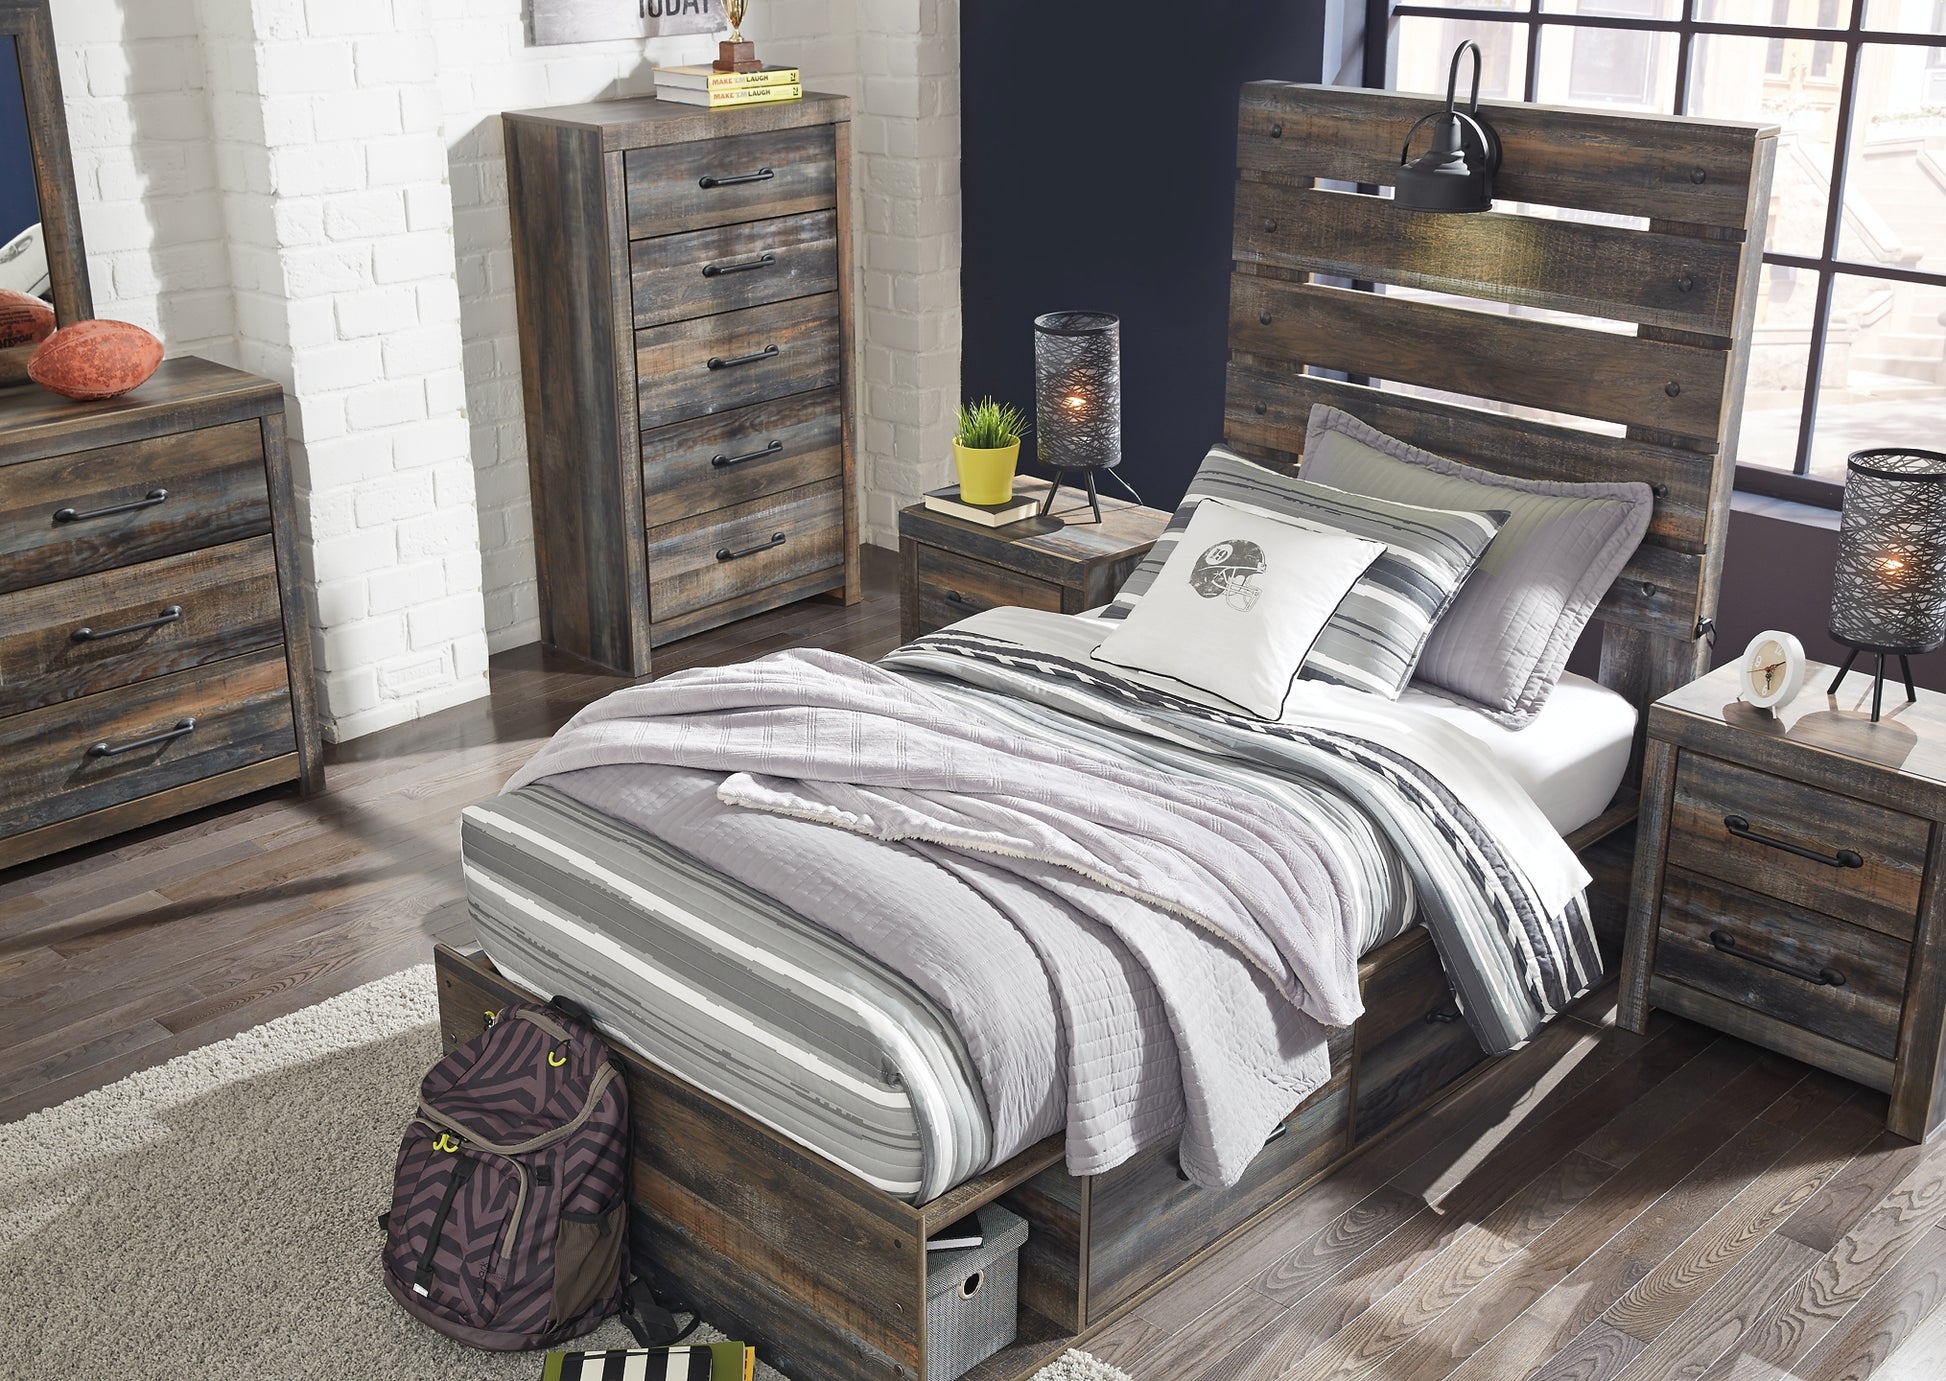 Drystan Queen Panel Bed with 2 Storage Drawers JB's Furniture  Home Furniture, Home Decor, Furniture Store